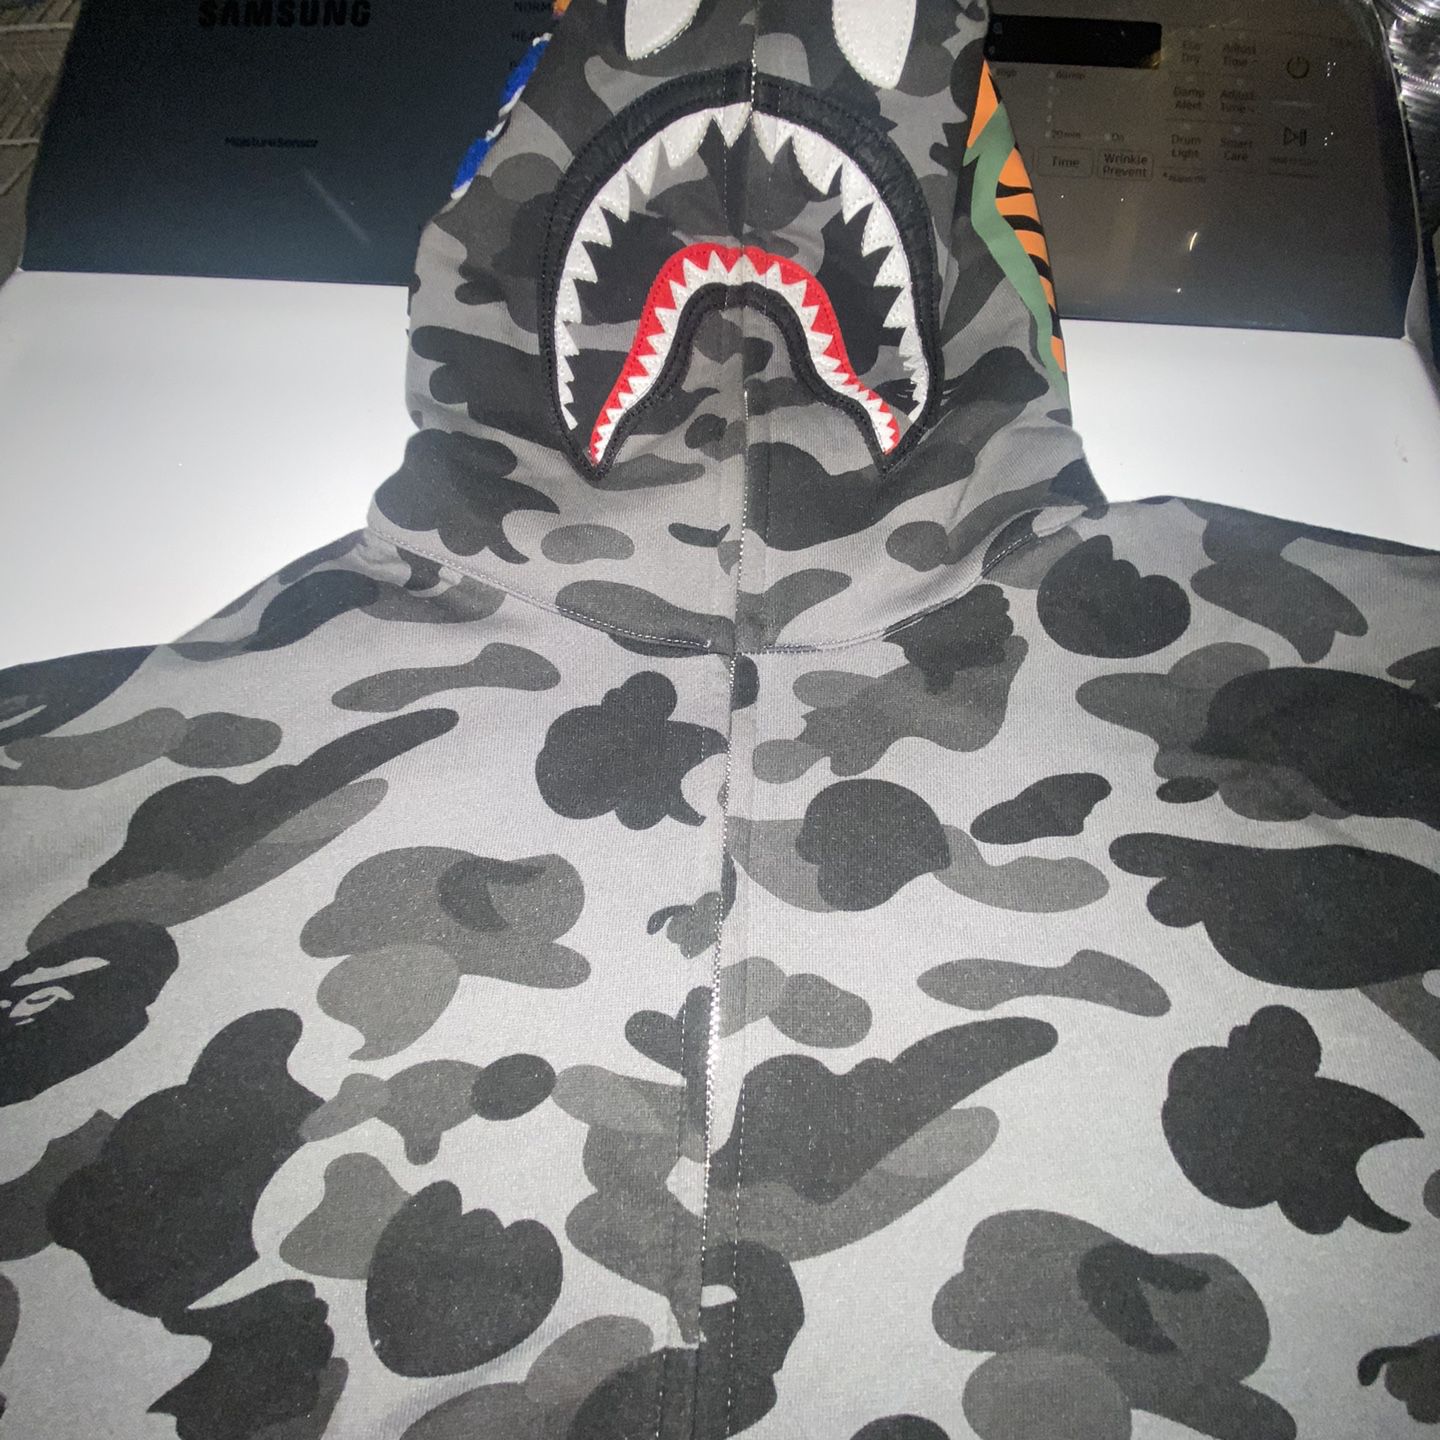 Dark Grey Bape Hoodie (XL) (Brand New) Message Me If Have Any Questions (IF NEED OF SHIPPING MESSAGE ME)